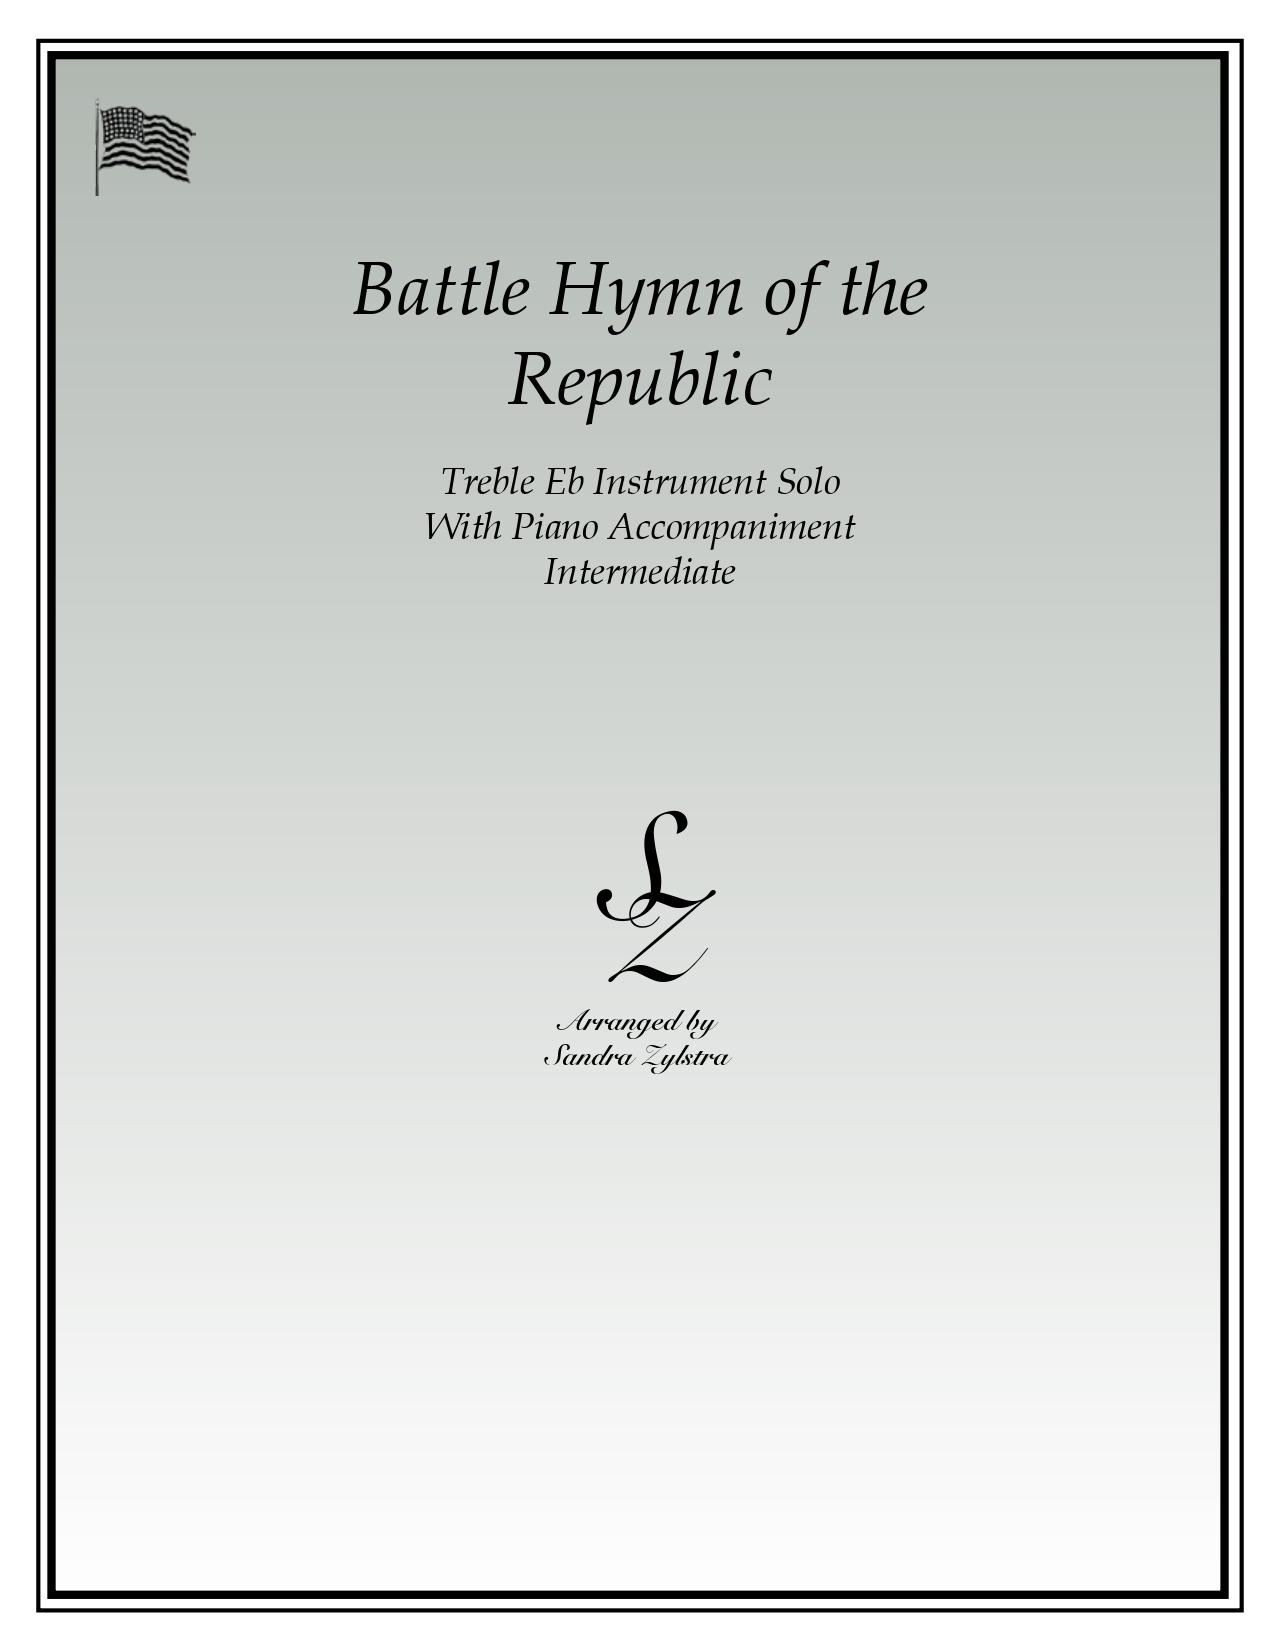 Battle Hymn Of The Republic Eb instrument solo part cover page 00011